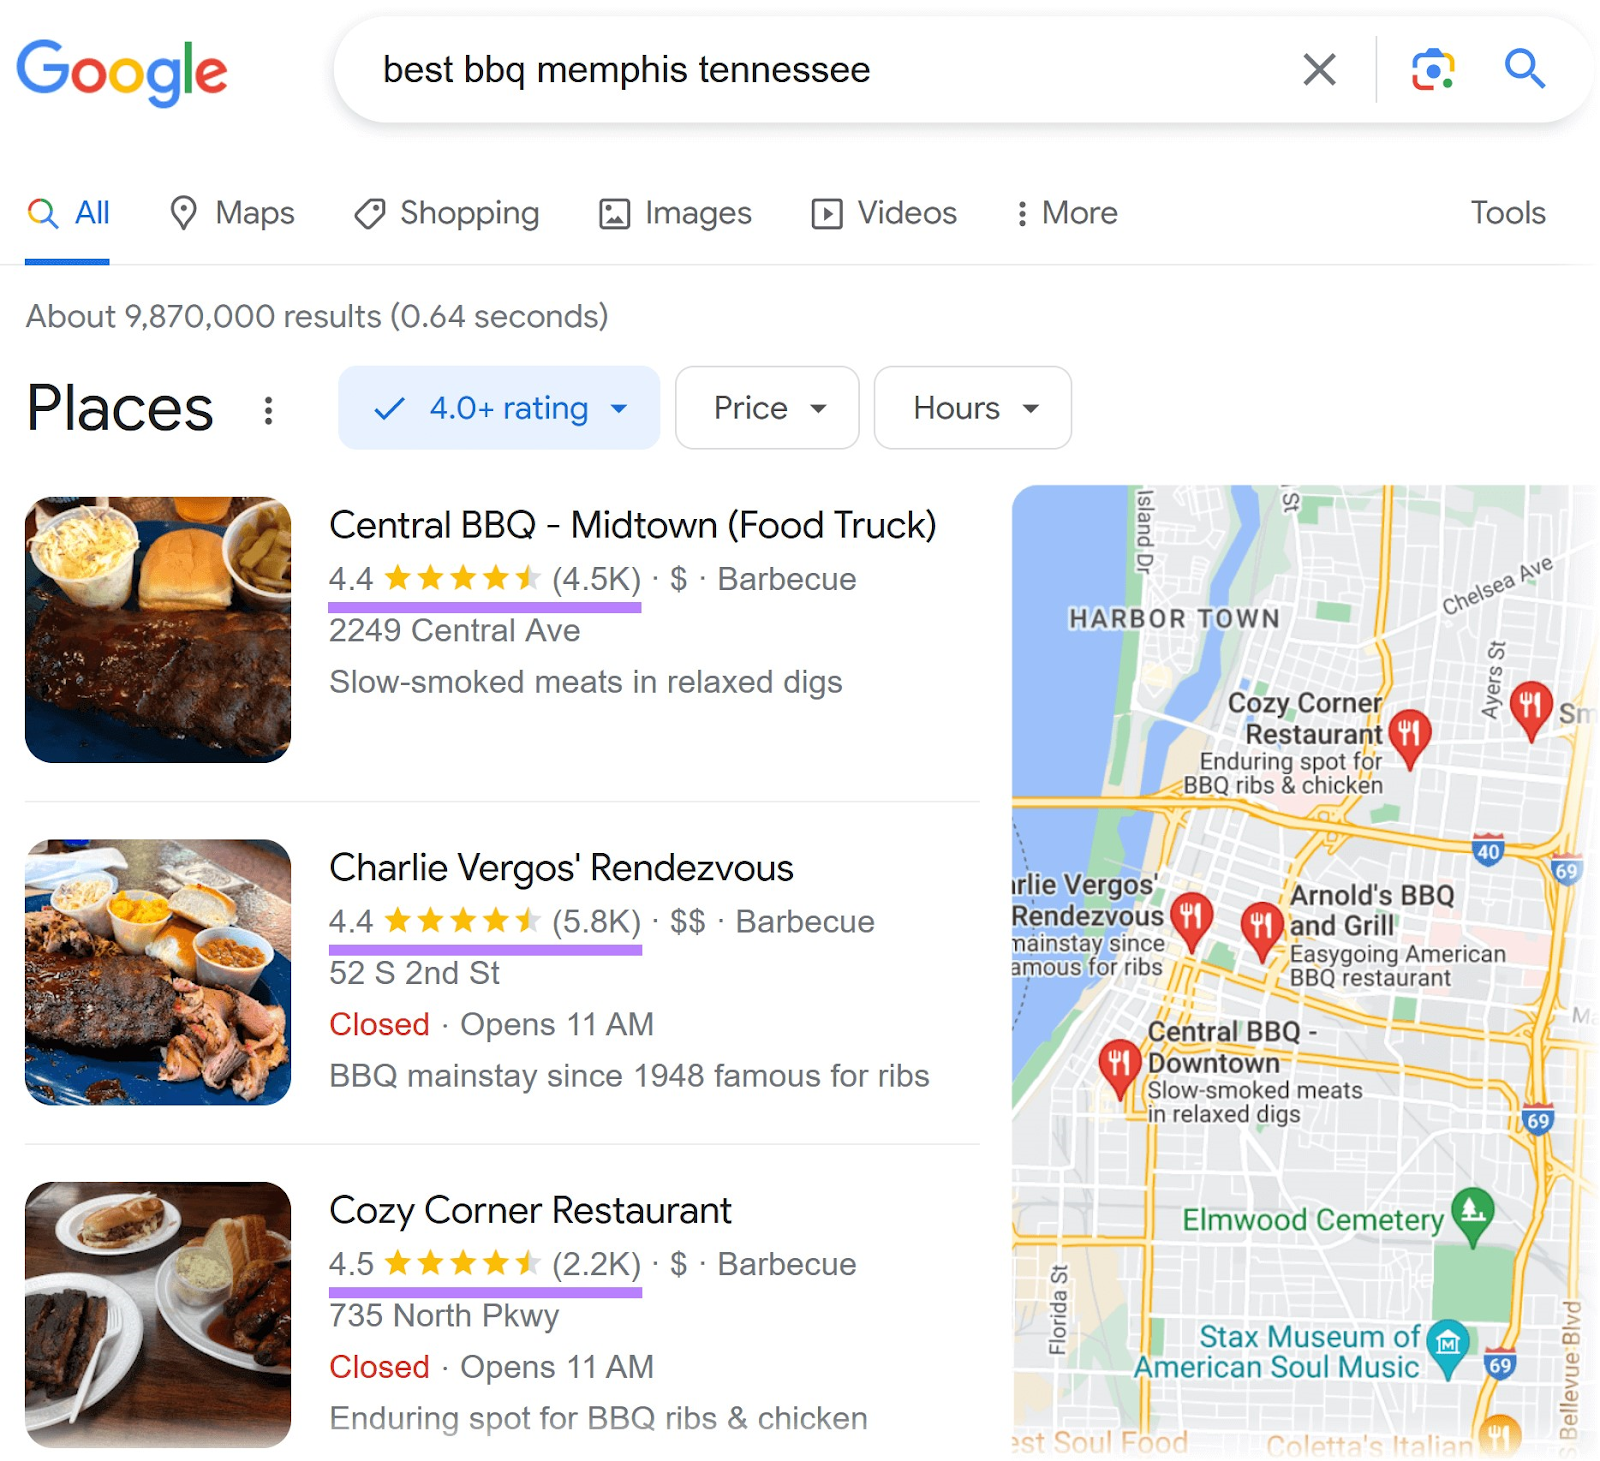 example of high-ranking results on Google for "best bbq memphis tennessee" with reviews highlighted